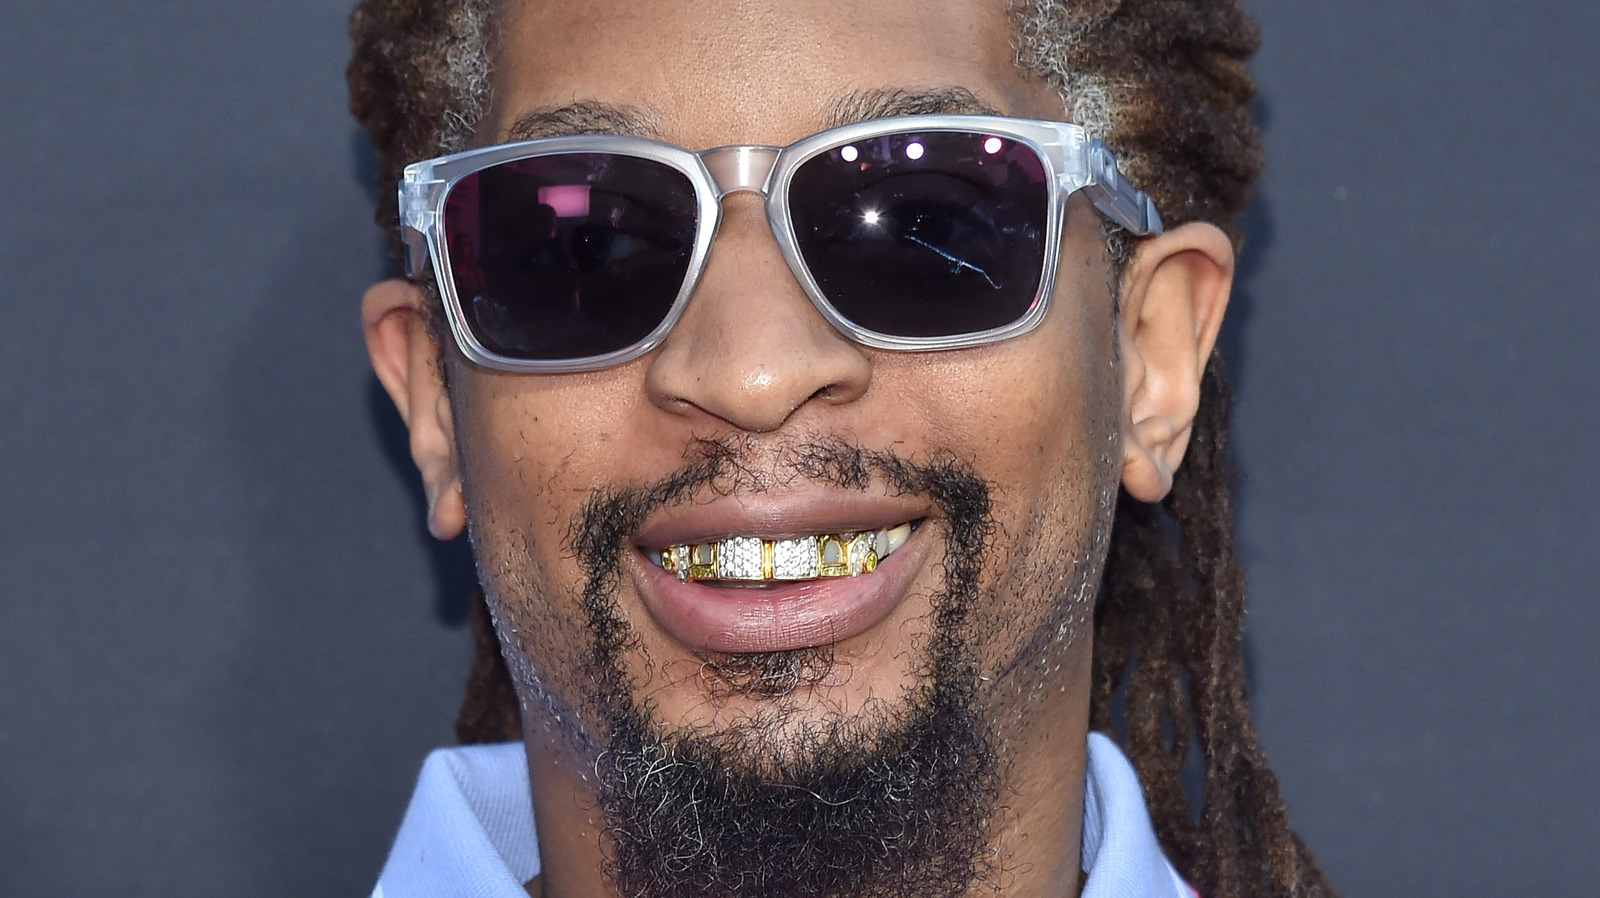 https://www.housedigest.com/img/gallery/when-is-hgtvs-lil-jon-wants-to-do-what-being-released/l-intro-1644344142.jpg